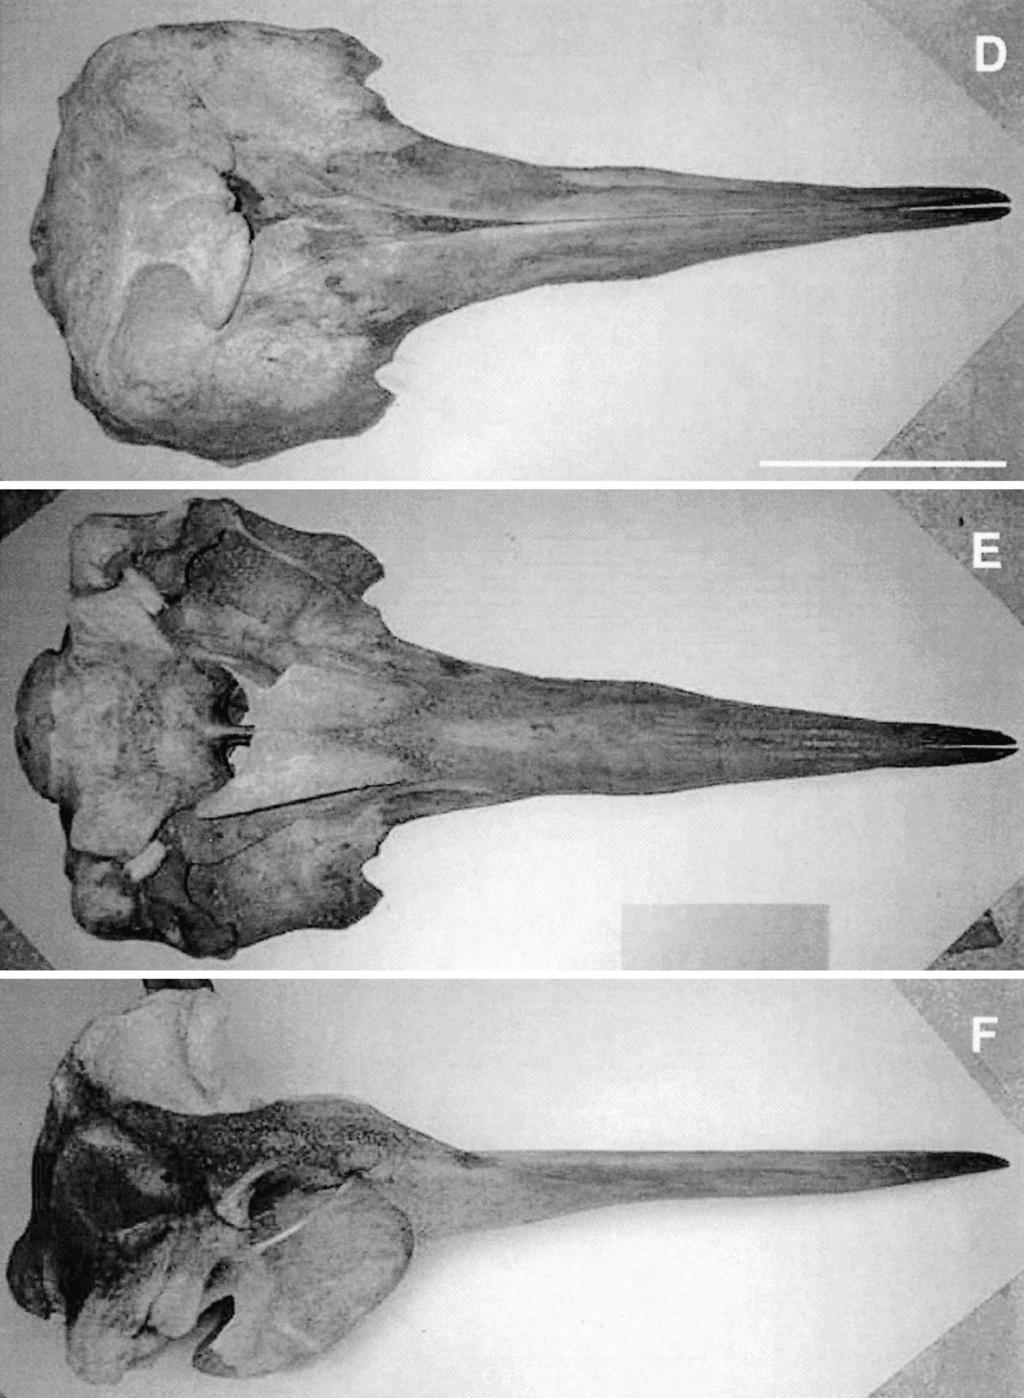 DALEBOUT ET AL.: NEW LONGMAN S BEAKED WHALES 439 Figure 6. Continued. forward at about 458 (Fig. 10E, X-ray of beak).